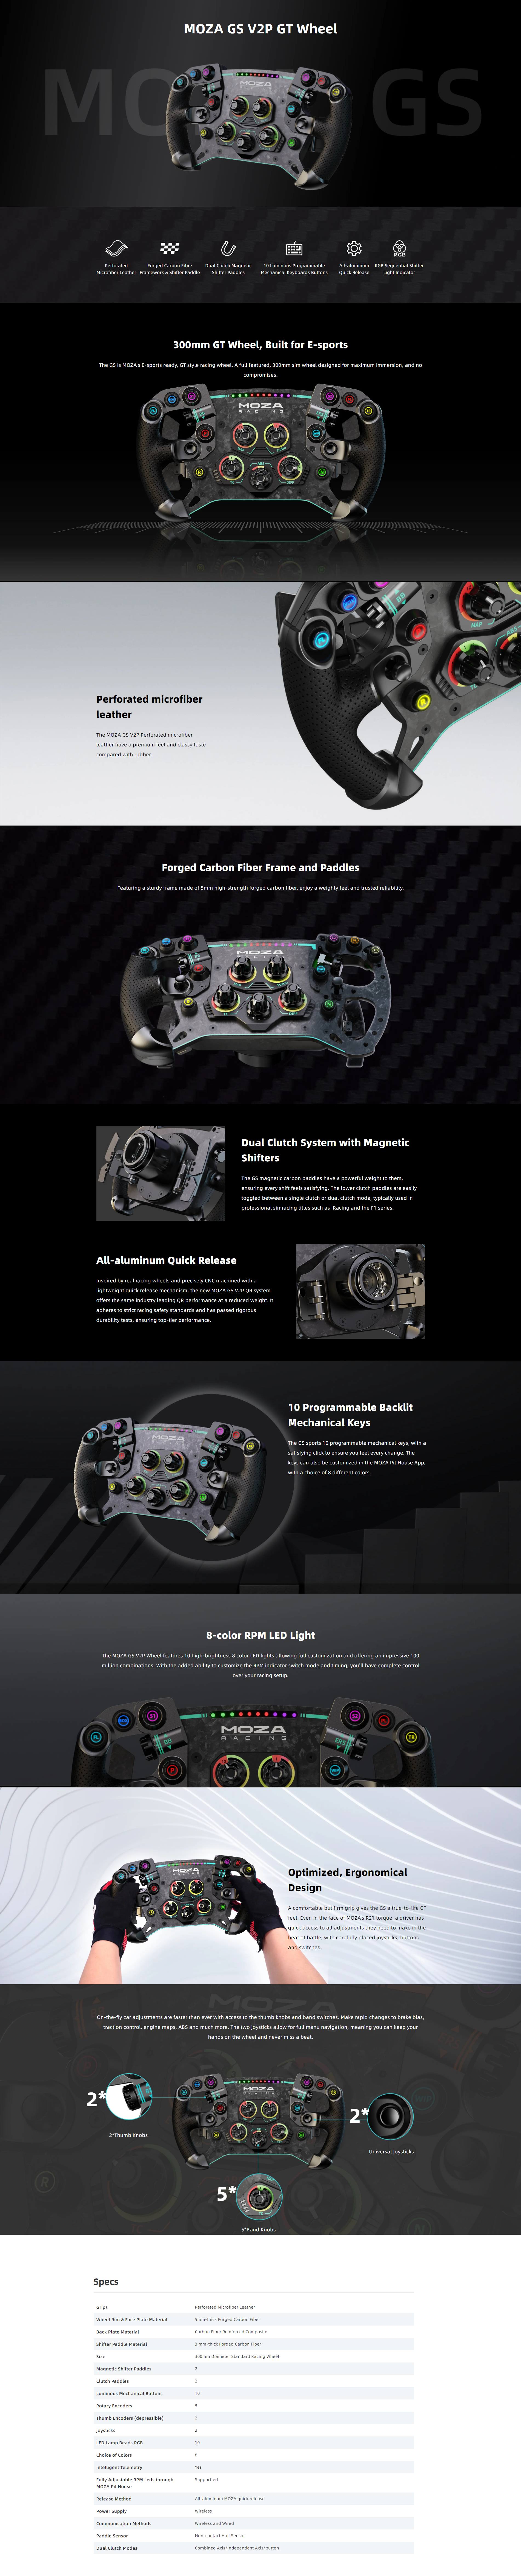 A large marketing image providing additional information about the product MOZA GS V2P Steering Wheel Microfiber Leather Version - Additional alt info not provided